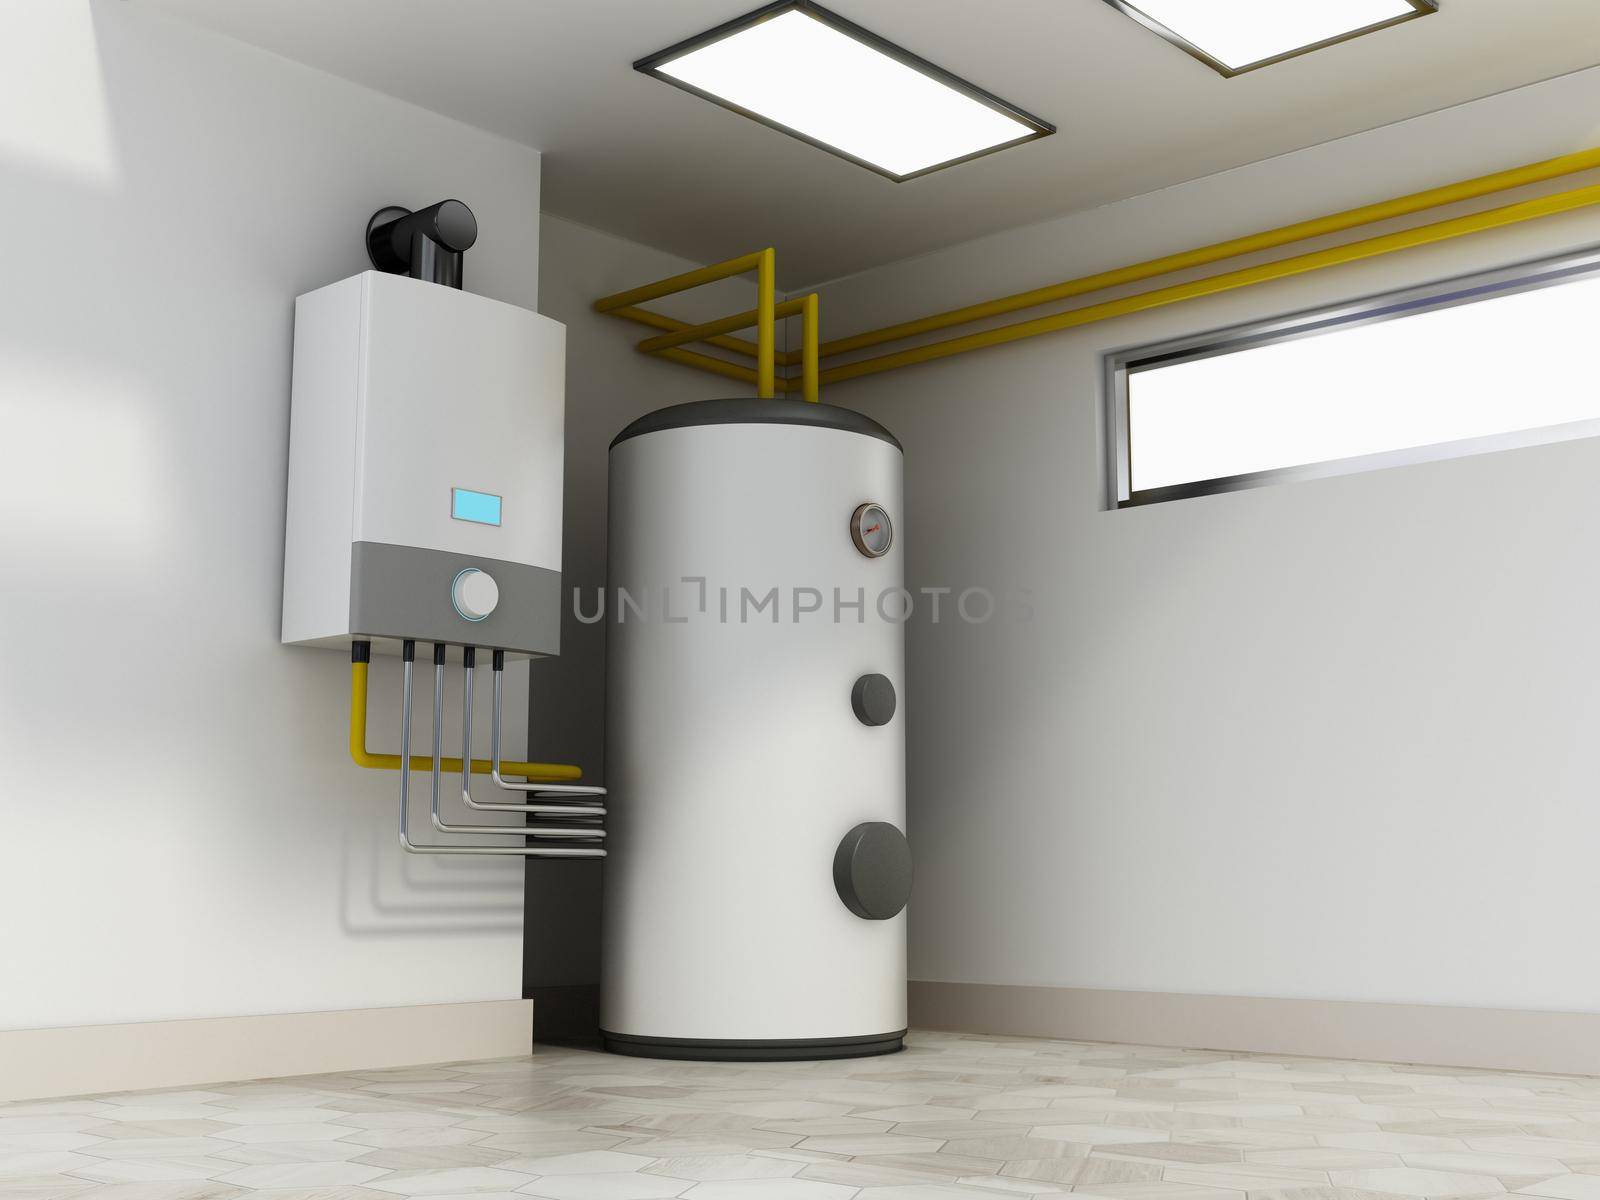 Electric water heaters connected with industrial water pipes. 3D illustration by Simsek